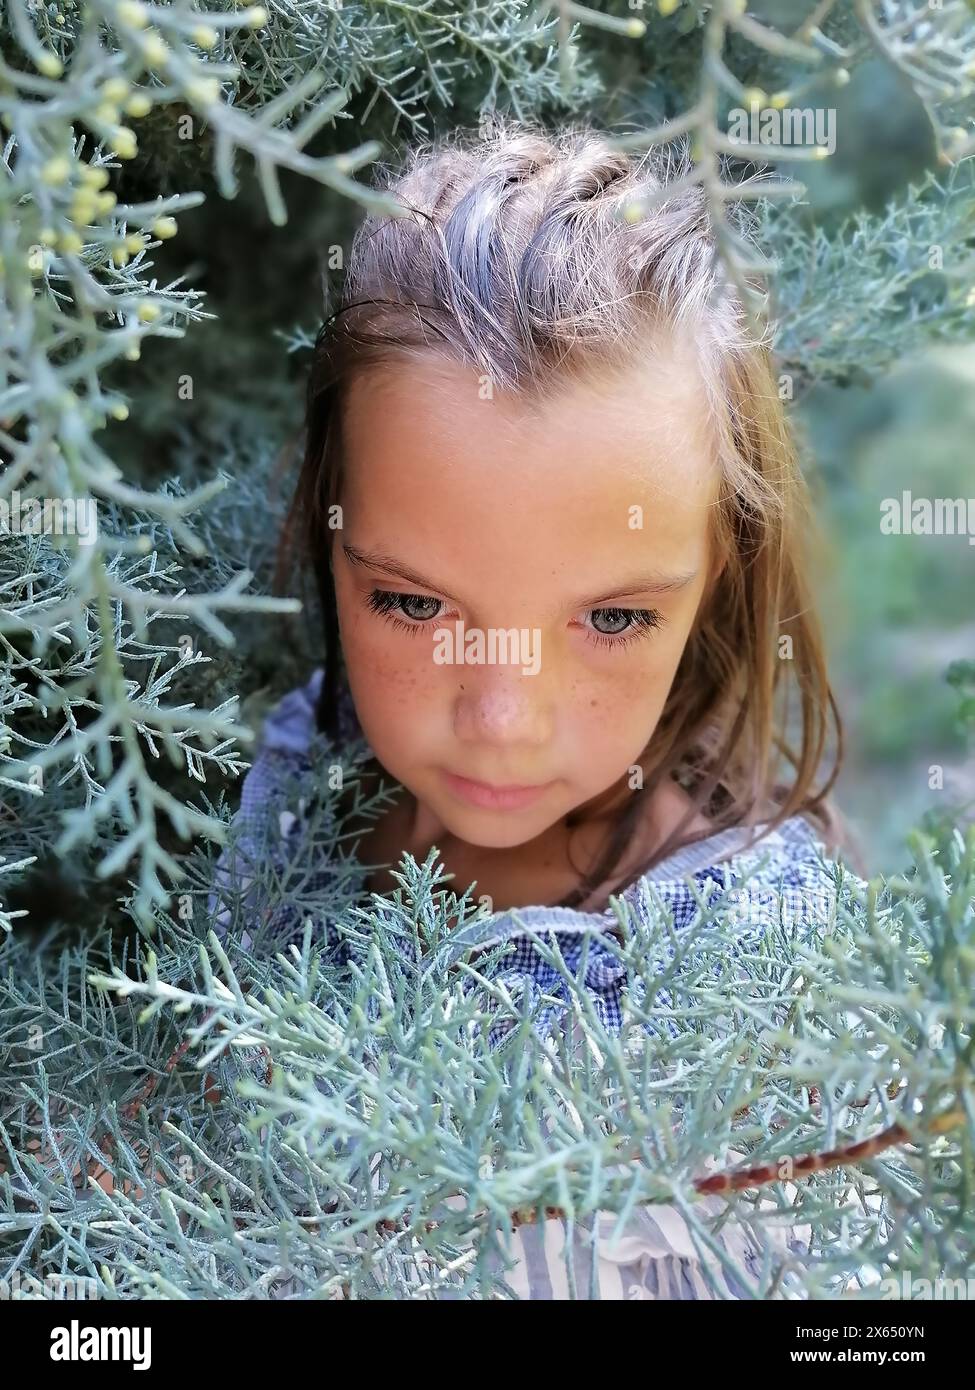 Little girl in the garden. Beautiful flowers roses. Cute lady watching thoughtfully. Child with big green eyes. Lovely flowers pink color. Green plant Stock Photo